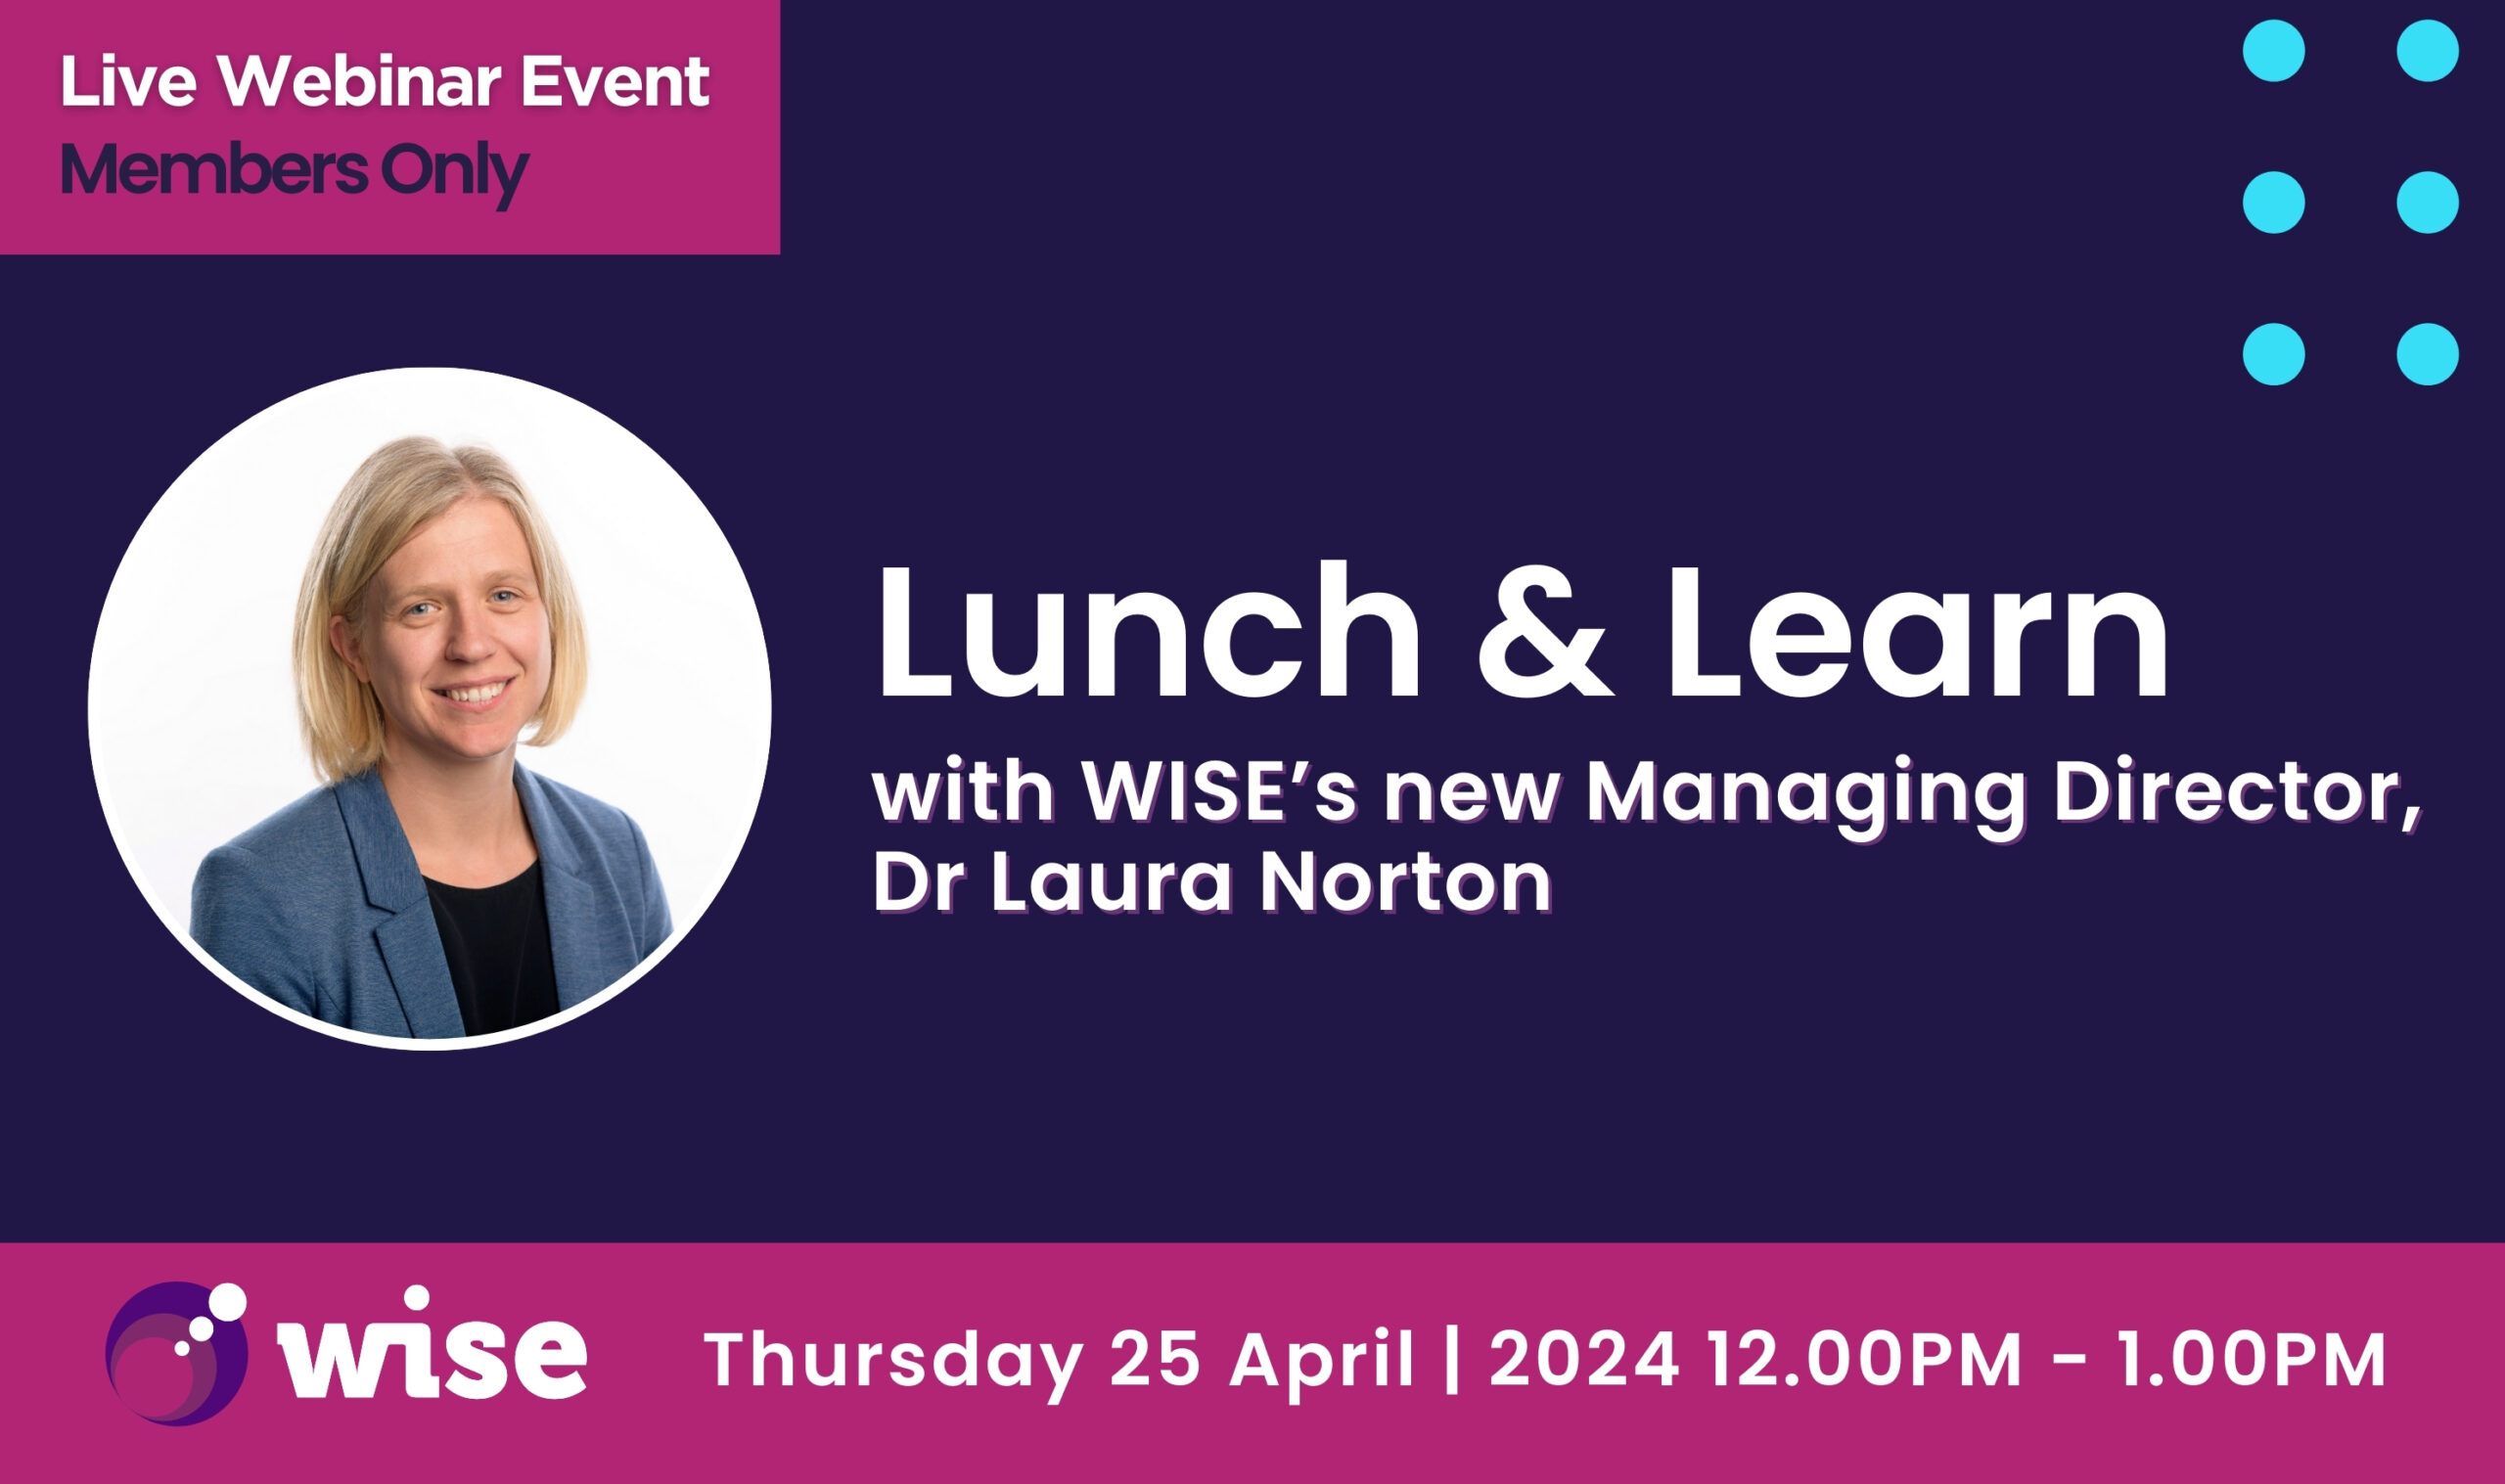 Lunch and Learn with Dr Laura Norton